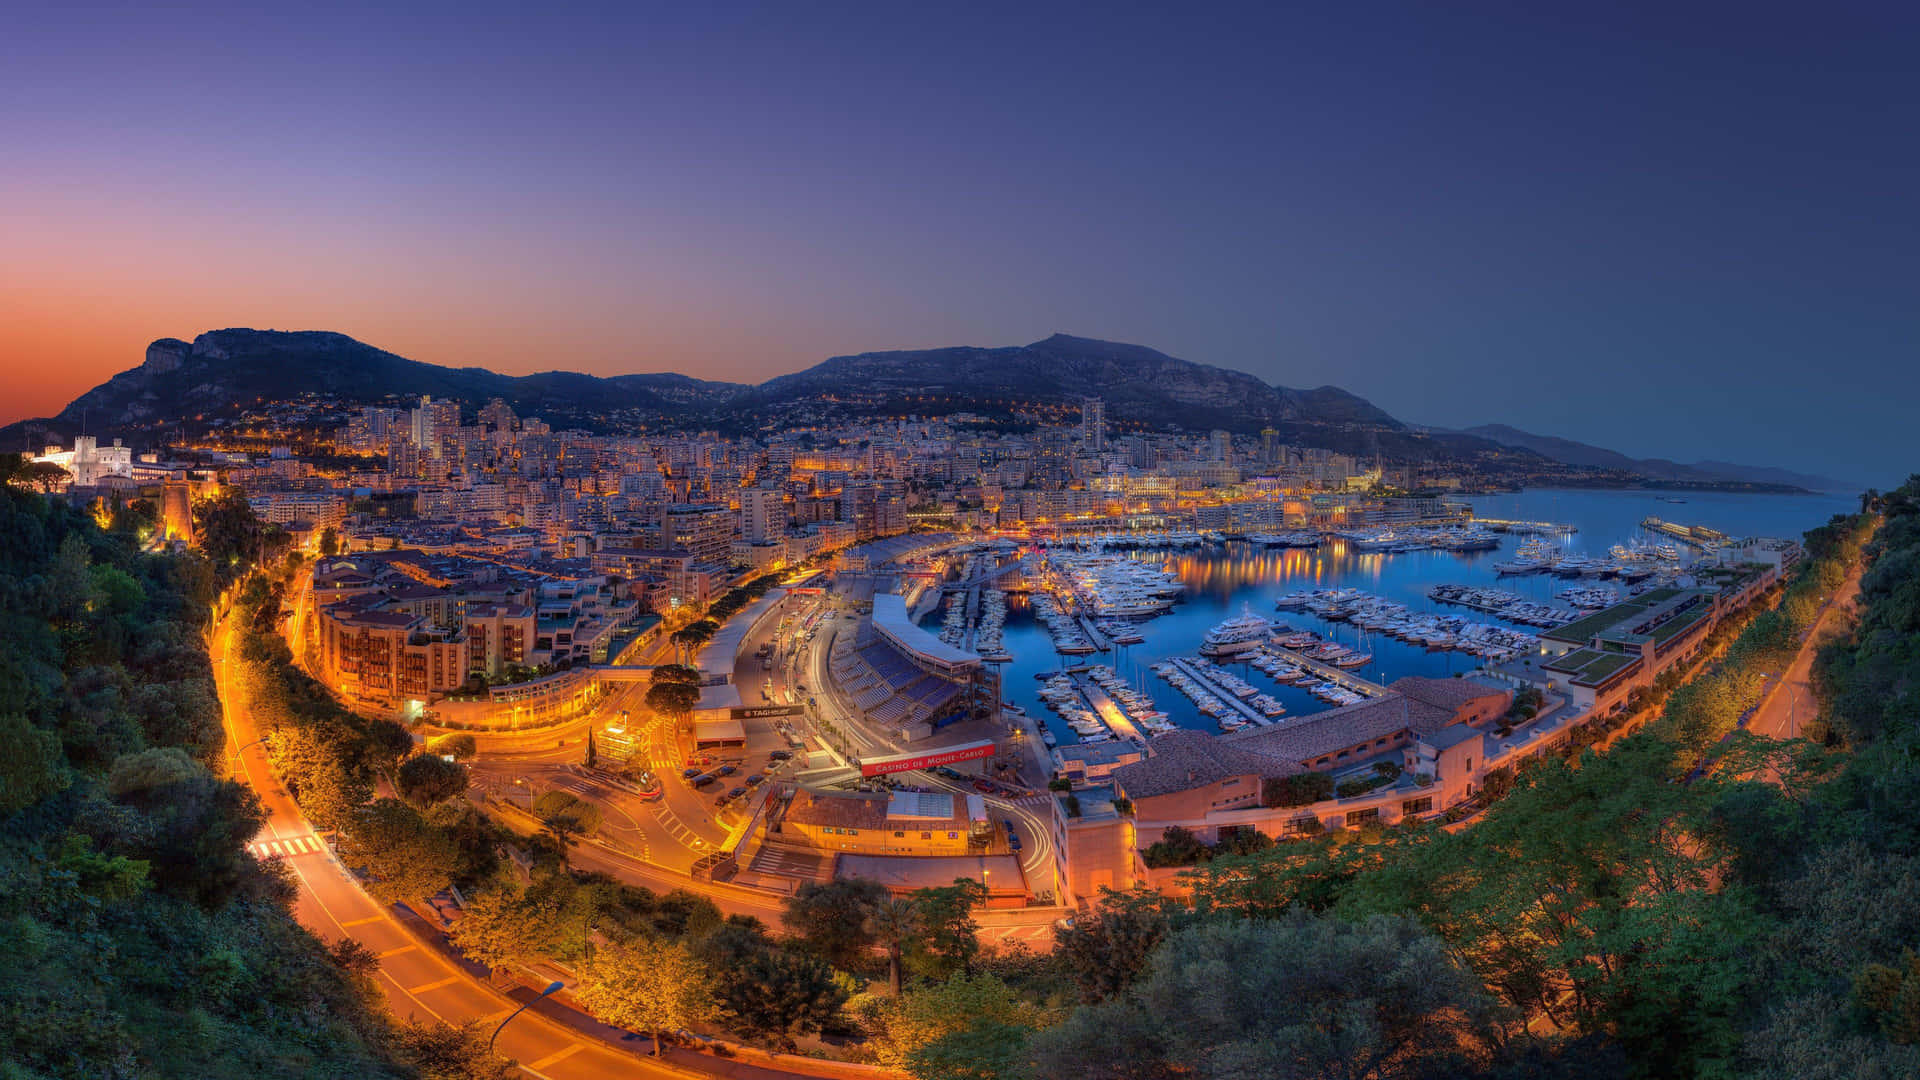 A View Of The City Of Monaco At Night